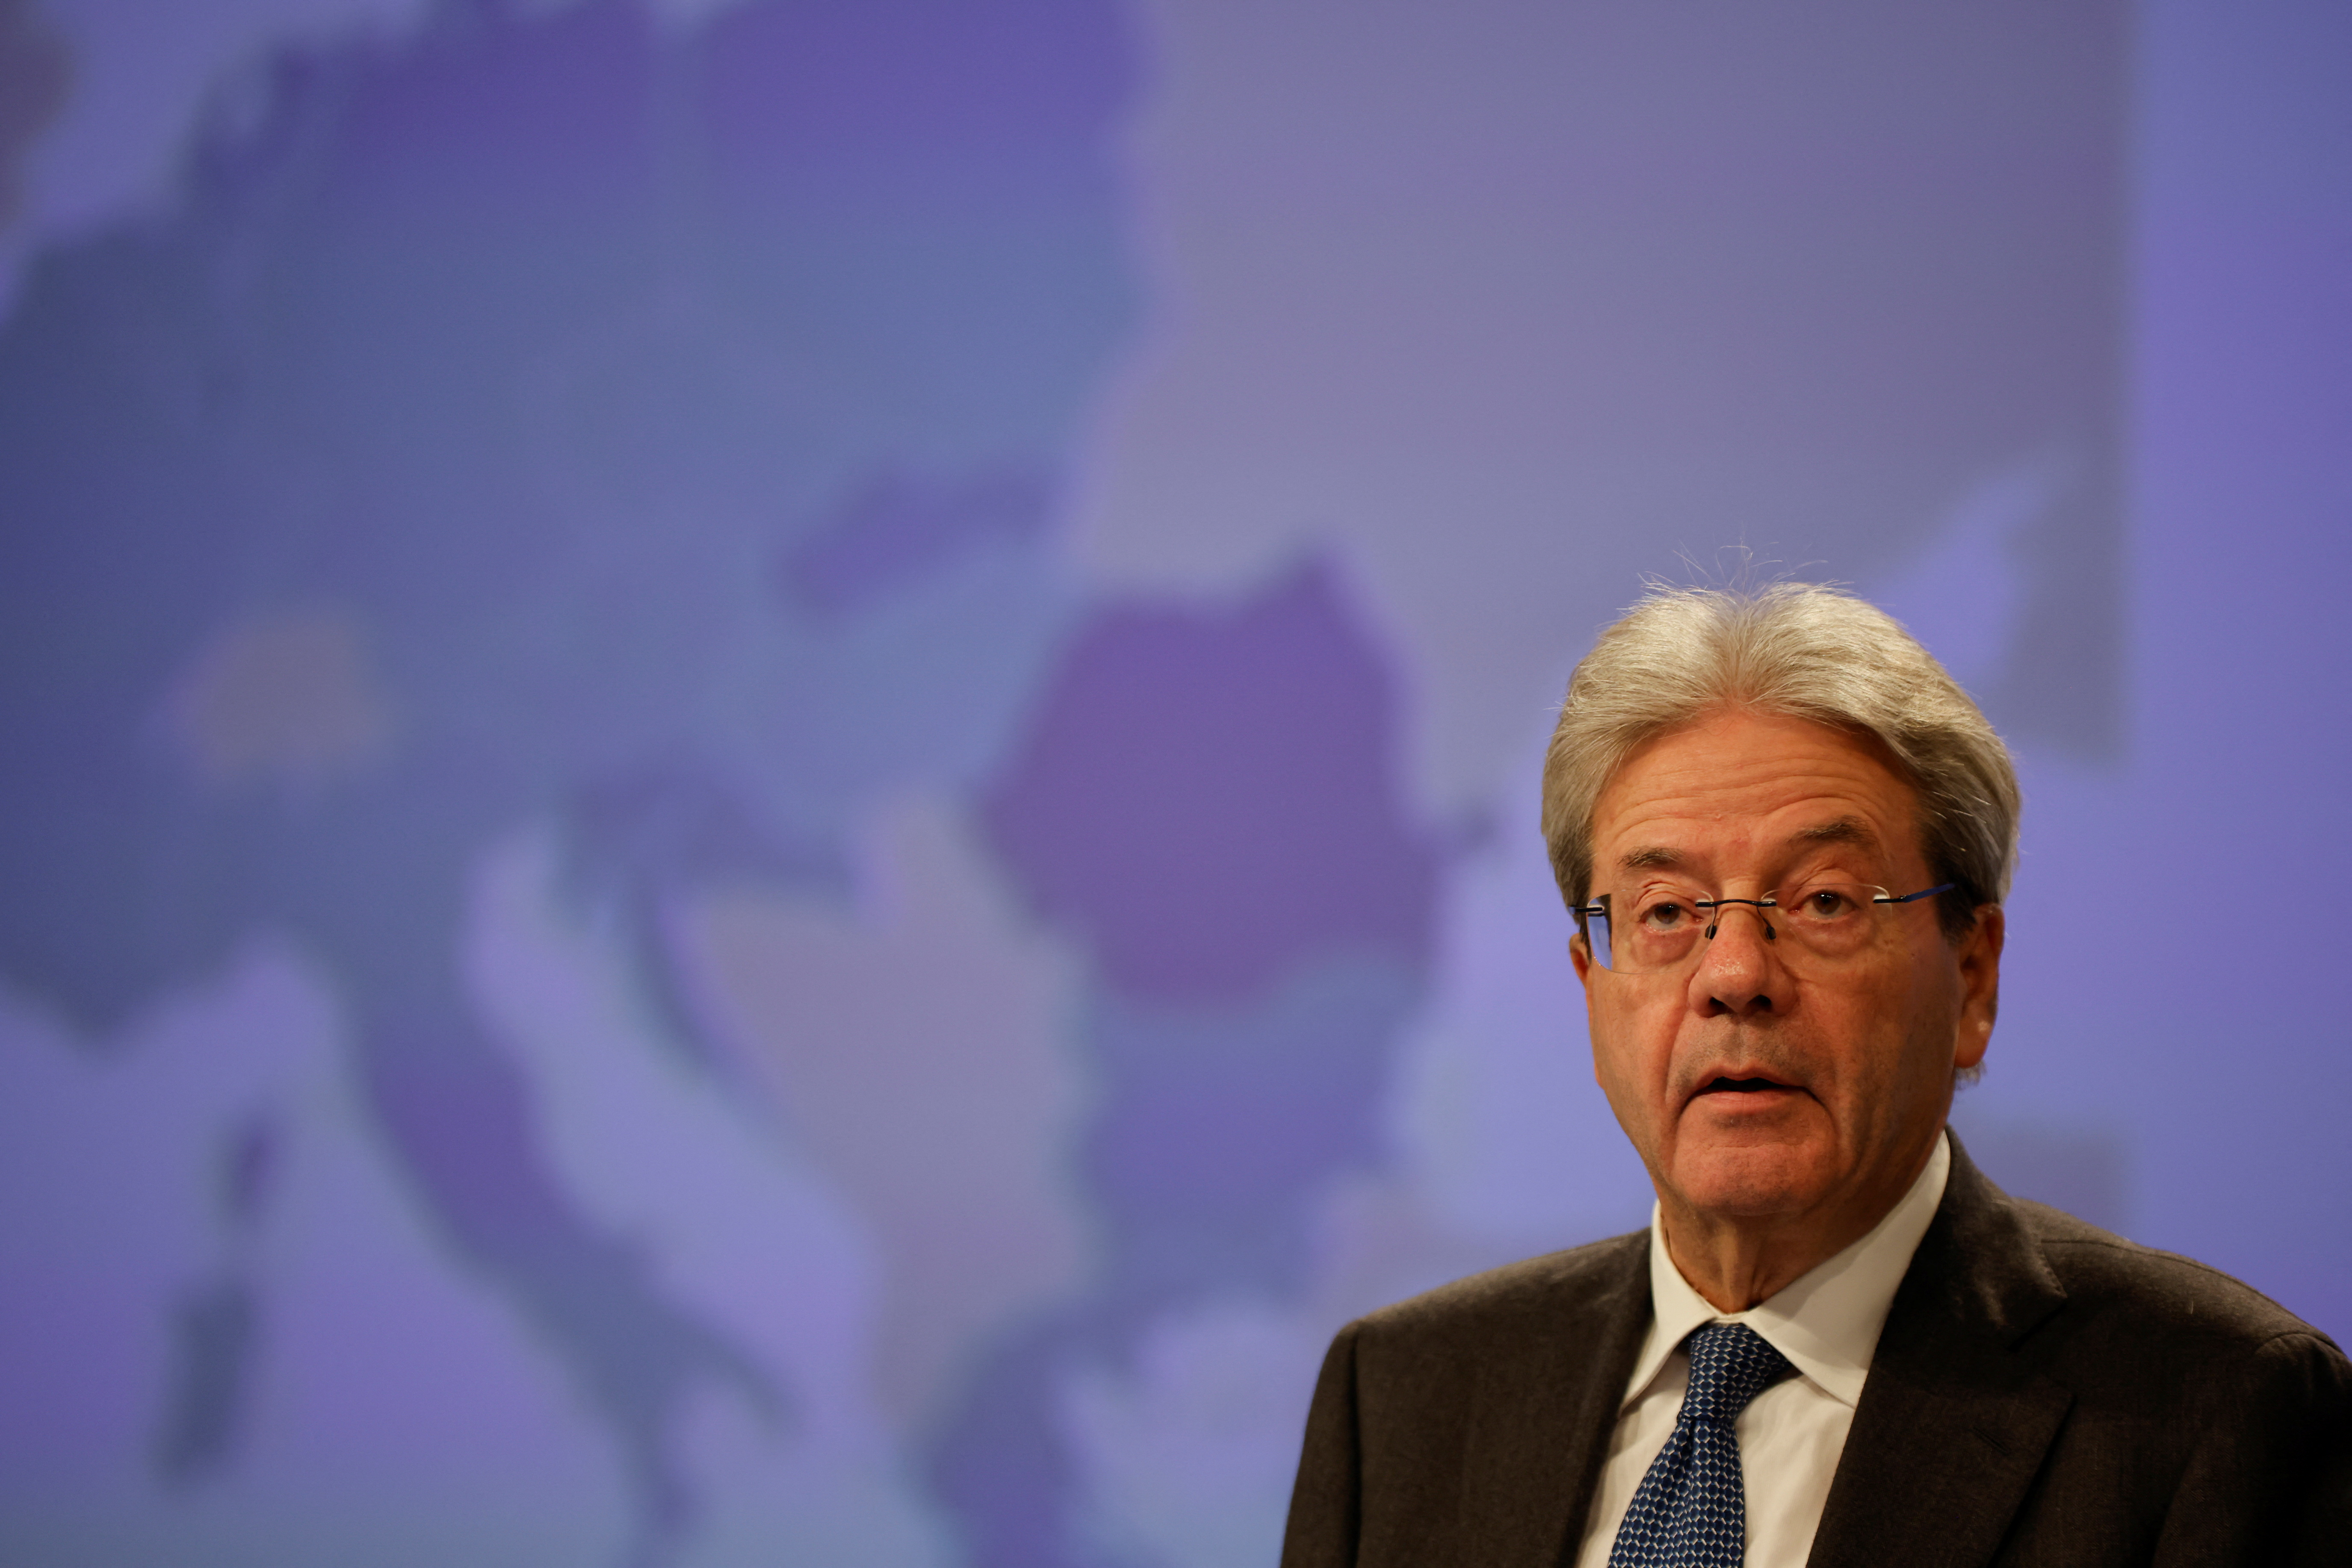 EU Economic Commissioner Paolo Gentiloni holds a news conference in Brussels